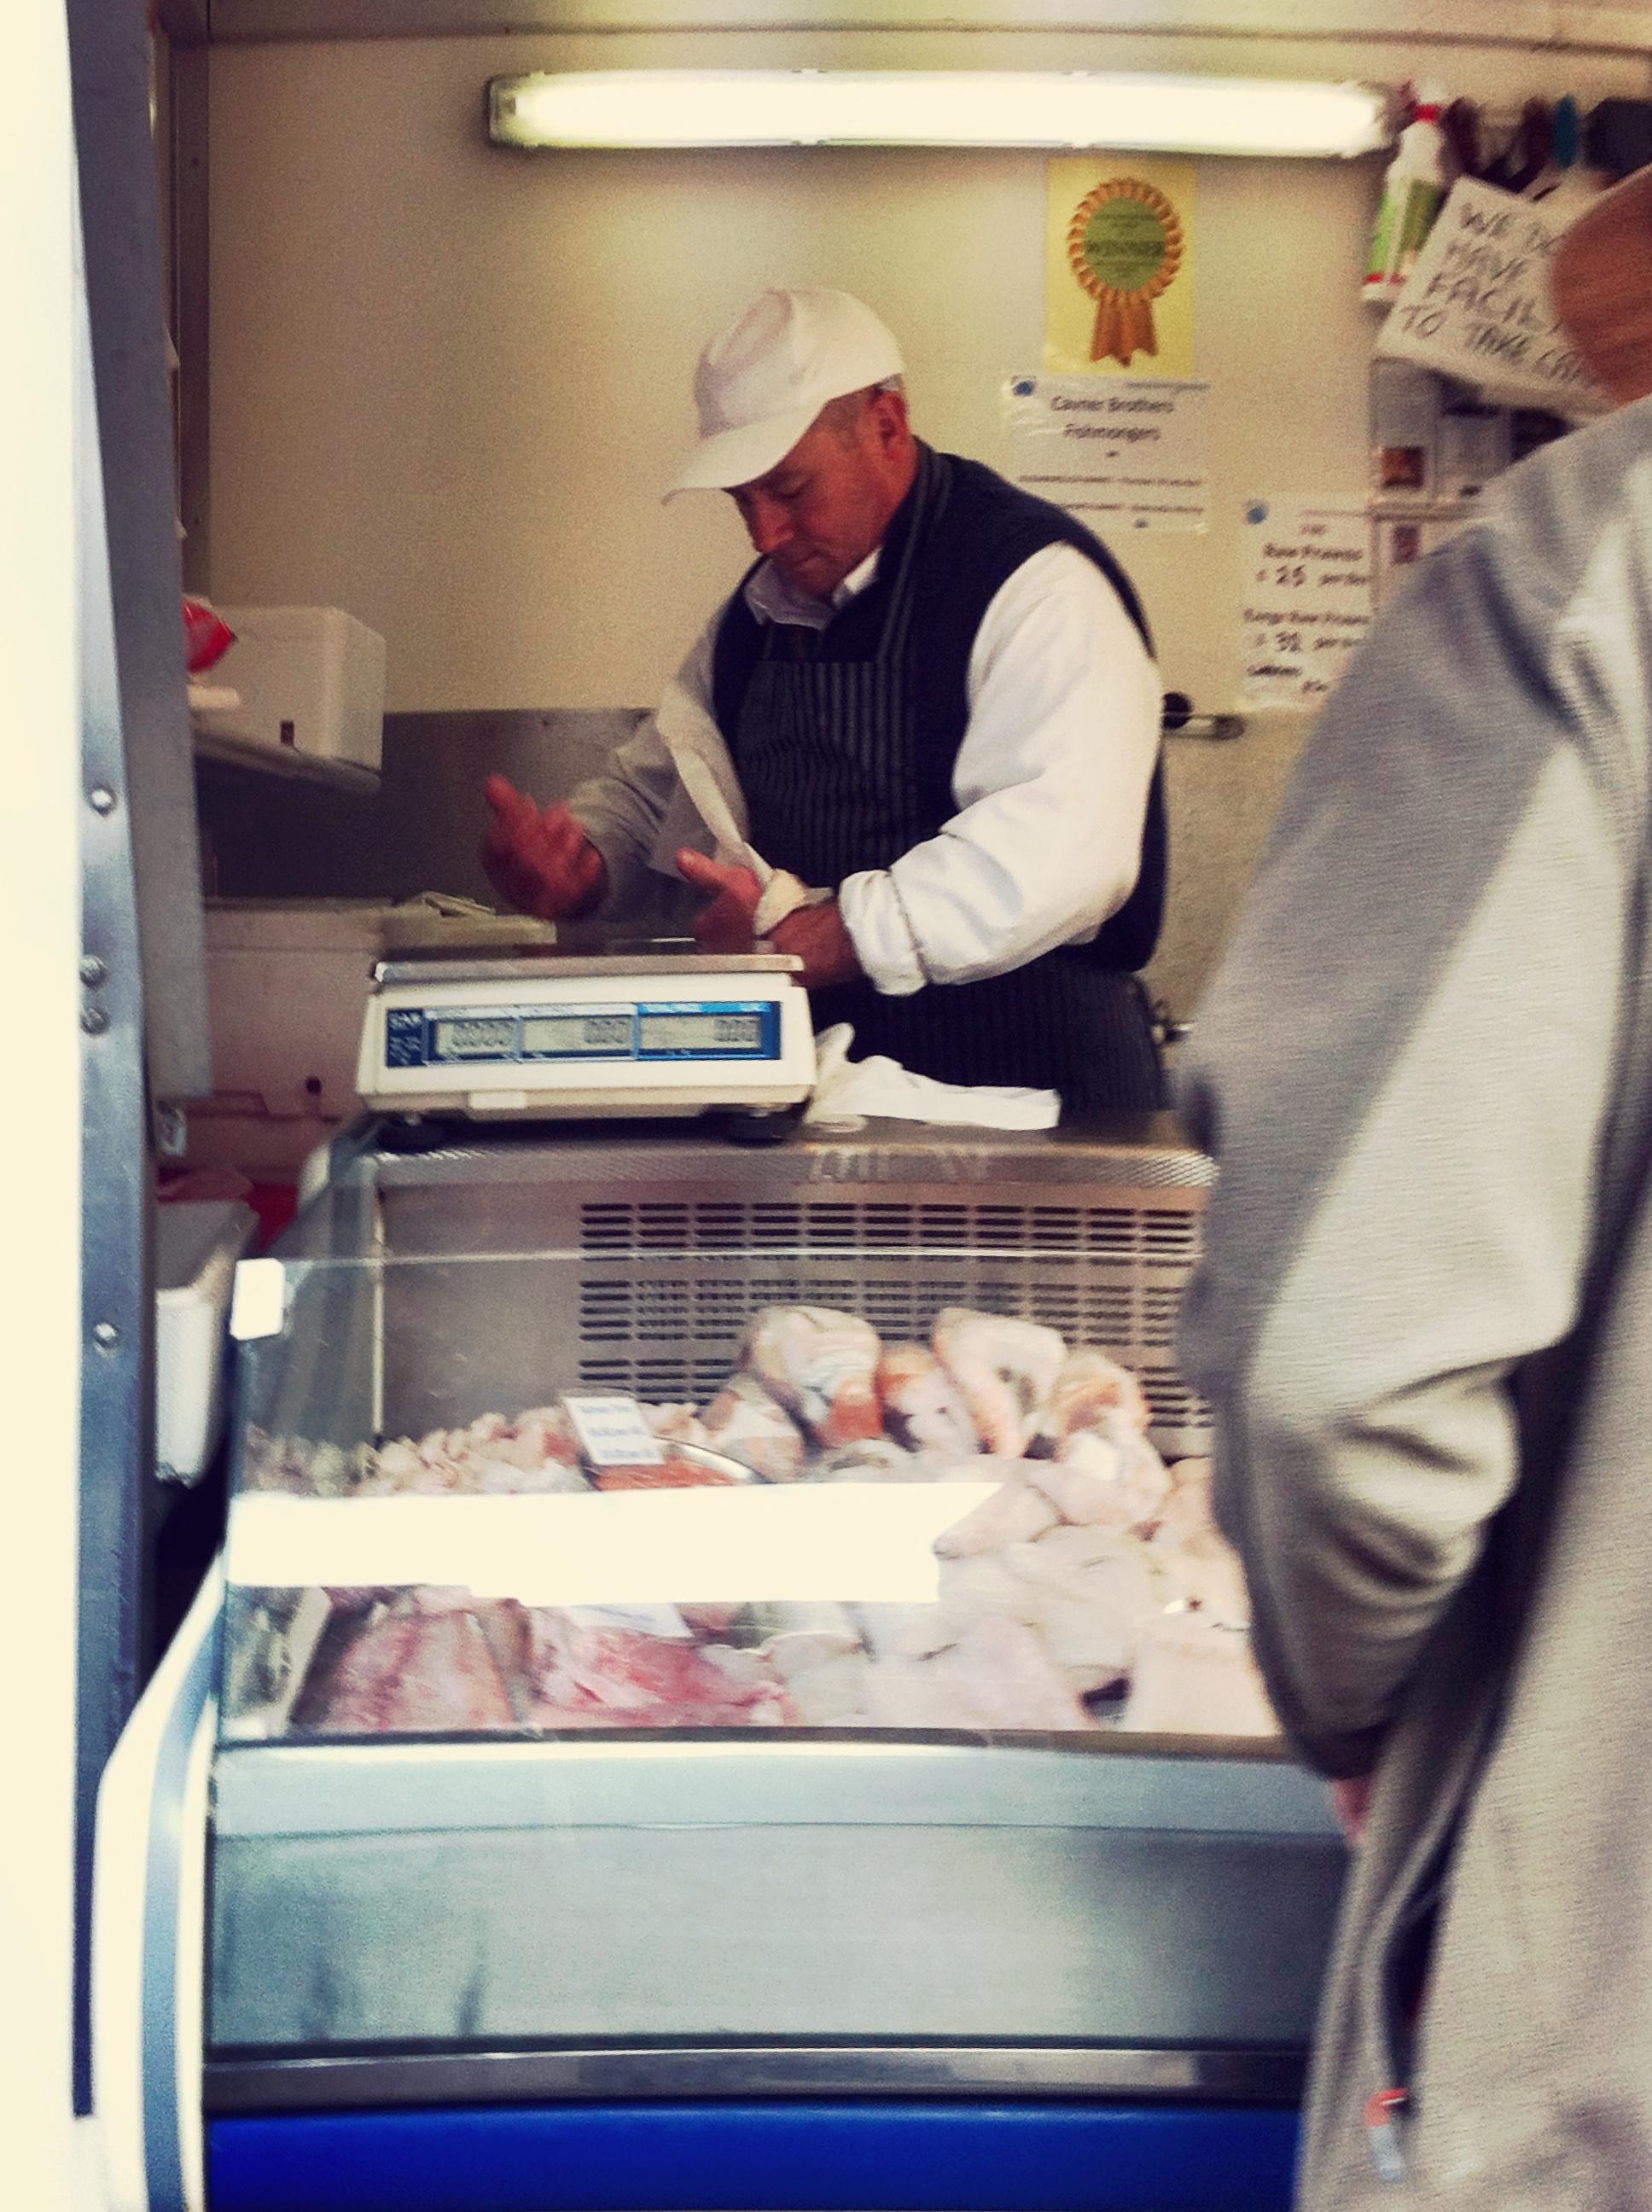 Fish Stall - Loughborough - Paul Conneally May 2017